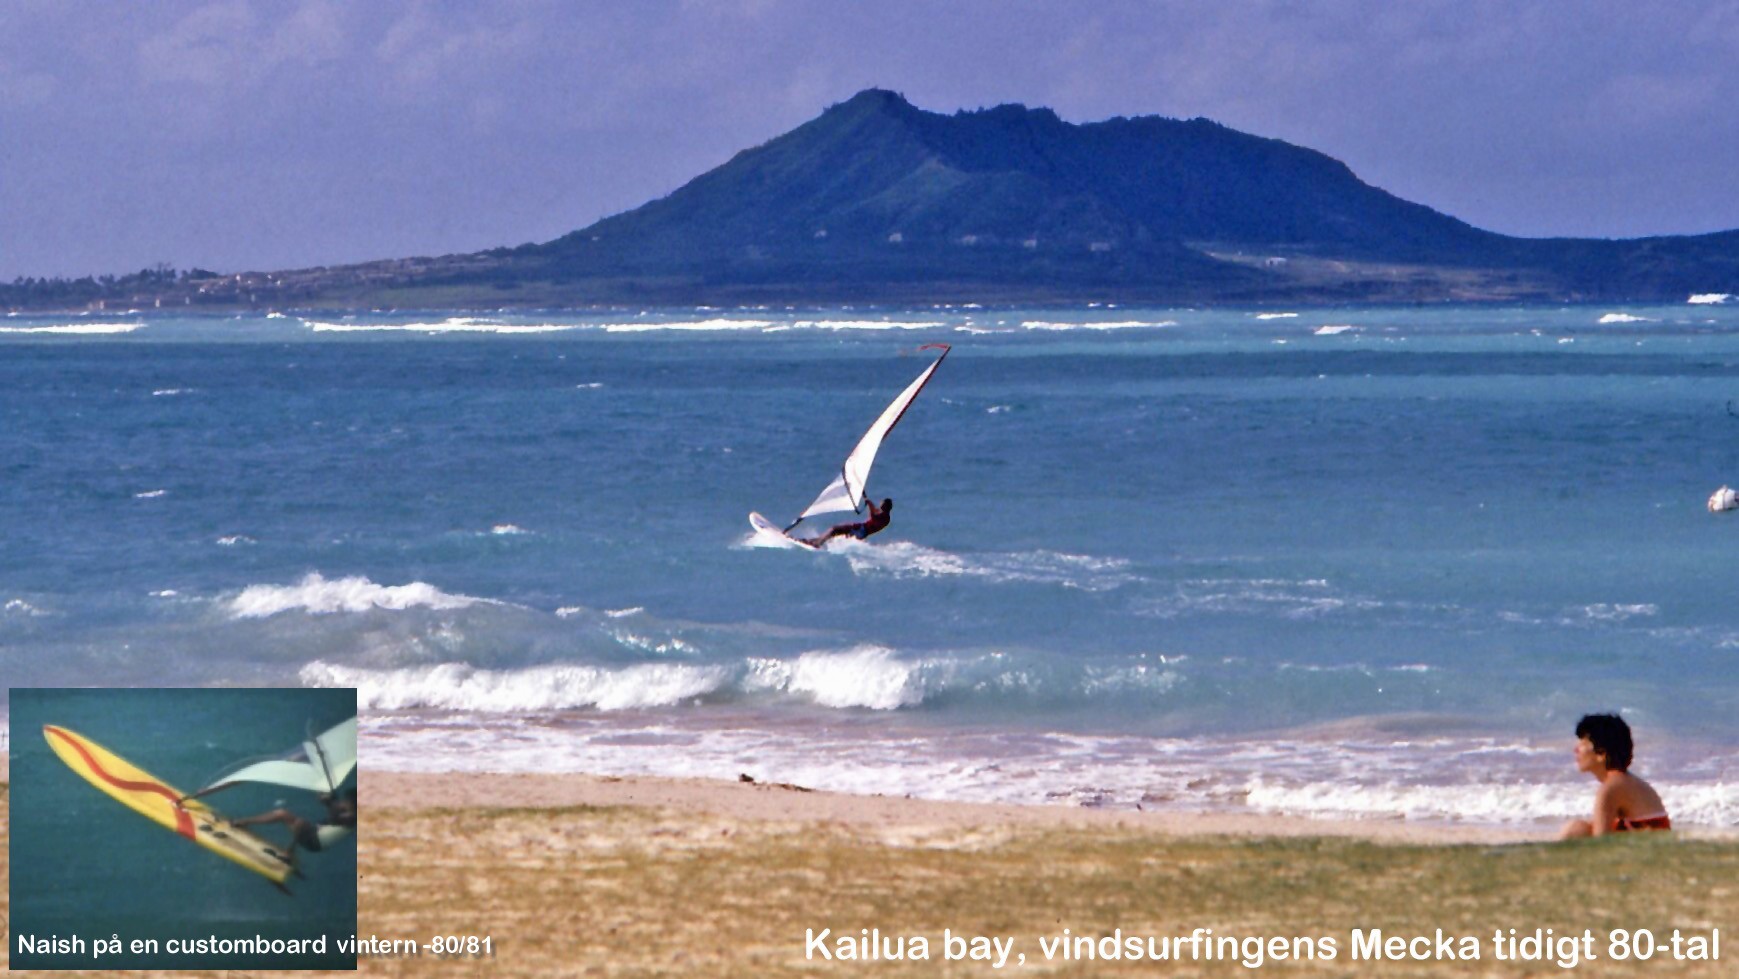 Kailua+Bay+-the+center+of+windsurfing%2C+where+it+all+started+in+the+early+80%C2%B4s